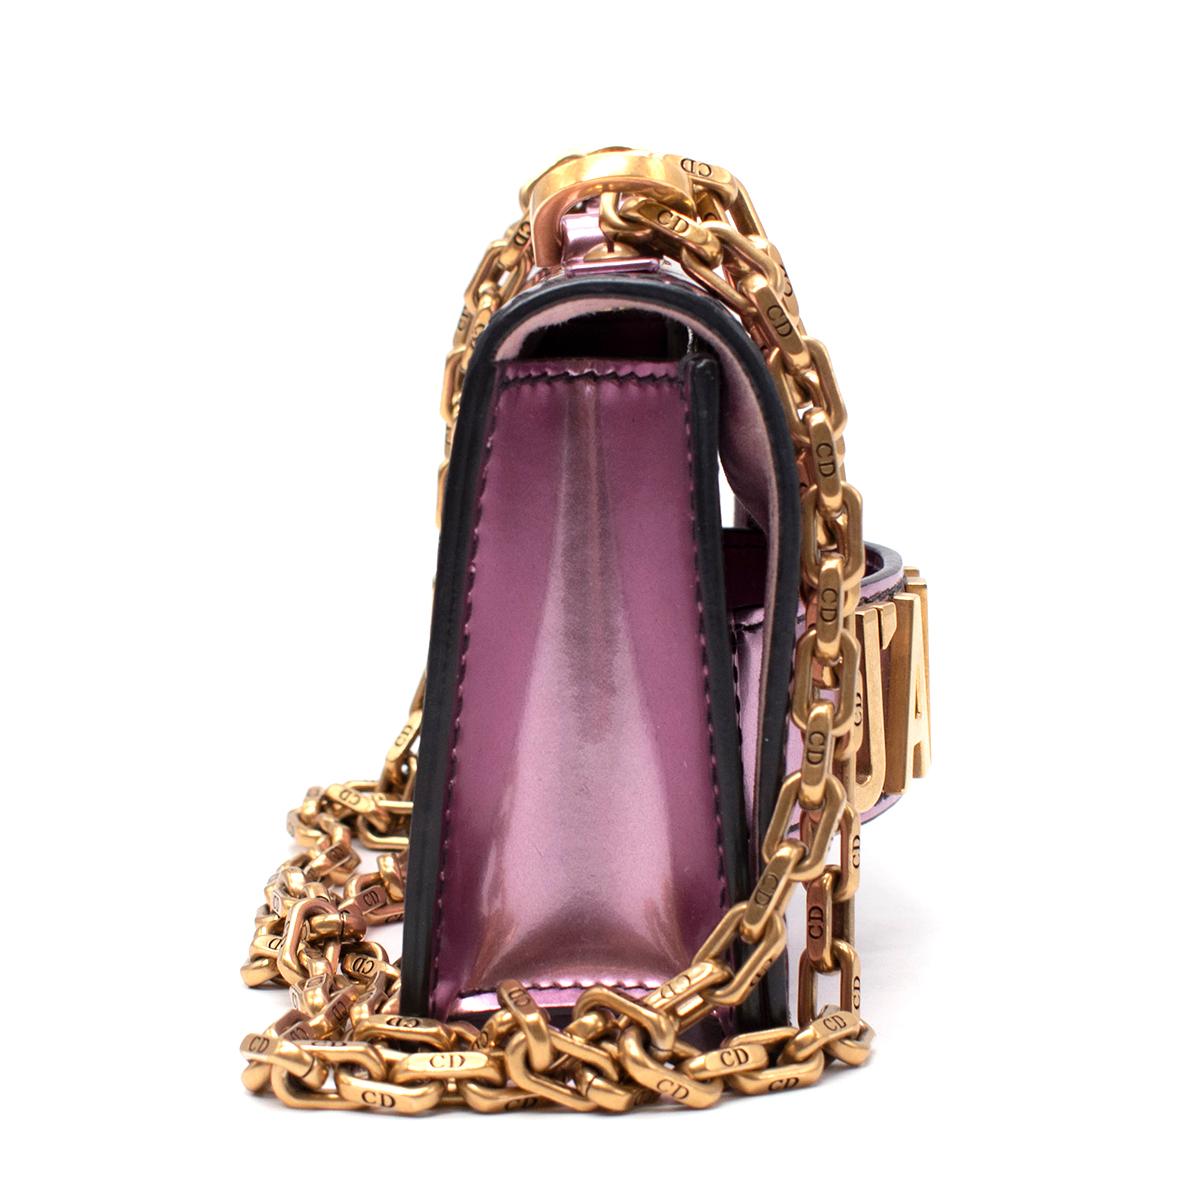 Christian Dior J'adior Metallic Pink Mirror Calfskin Flap Bag

- Jewellery in aged gold-tone metal
- Adjustable drawstring chain
- Magnet closing
- Leather front strap with a gold J'adior logo

Materials:
Calfskin leather

PLEASE NOTE, THESE ITEMS